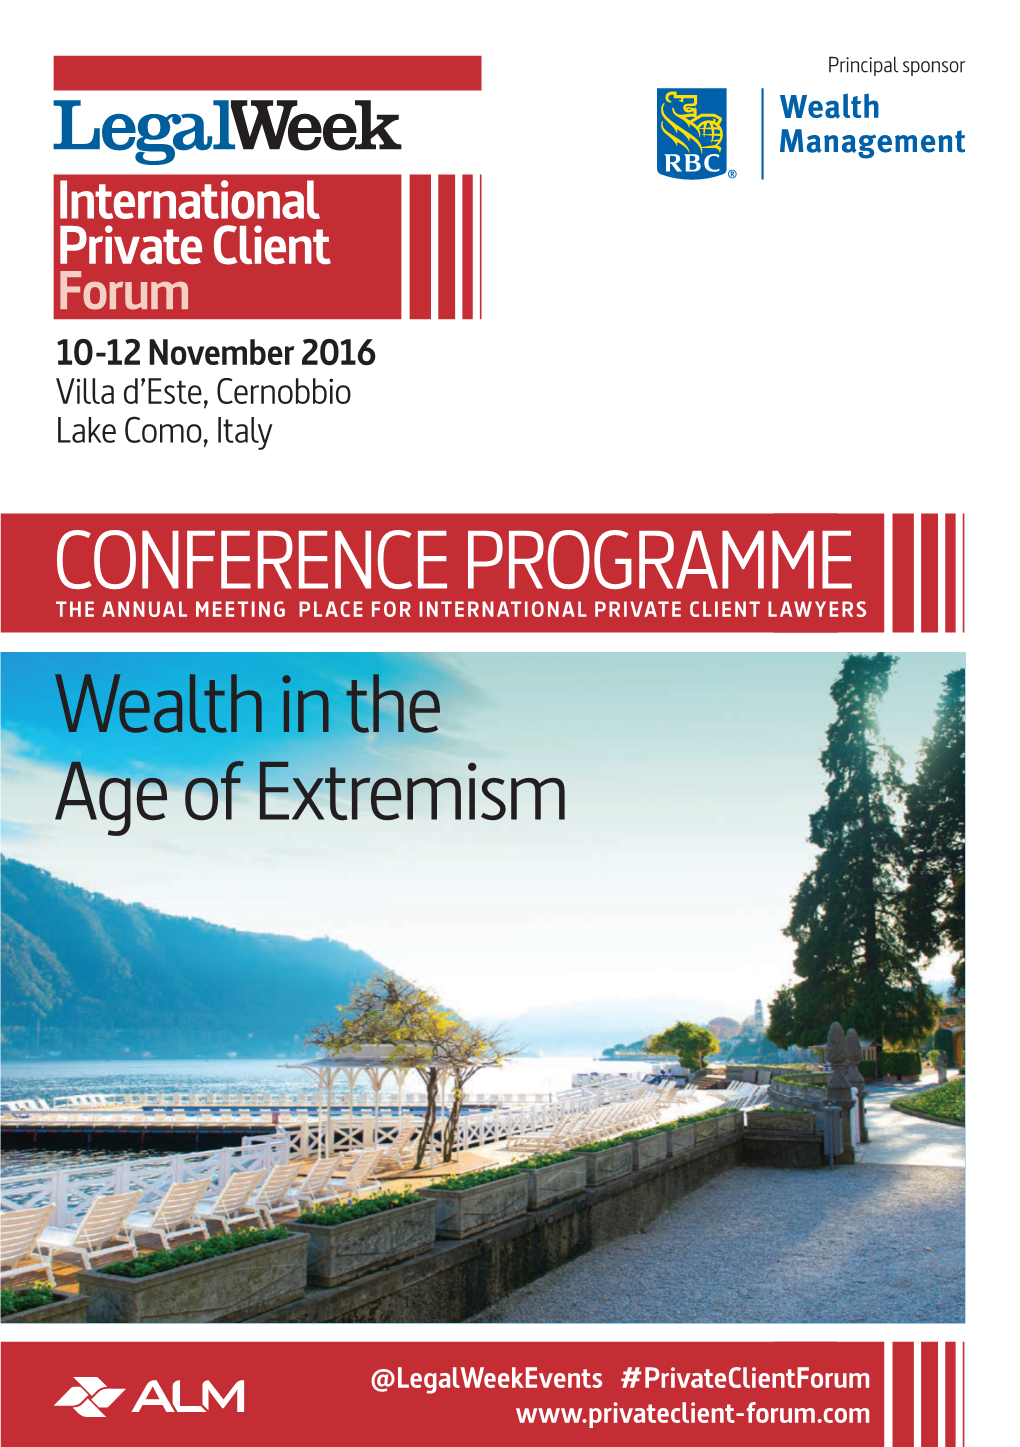 CONFERENCE PROGRAMME Wealth in the Age of Extremism